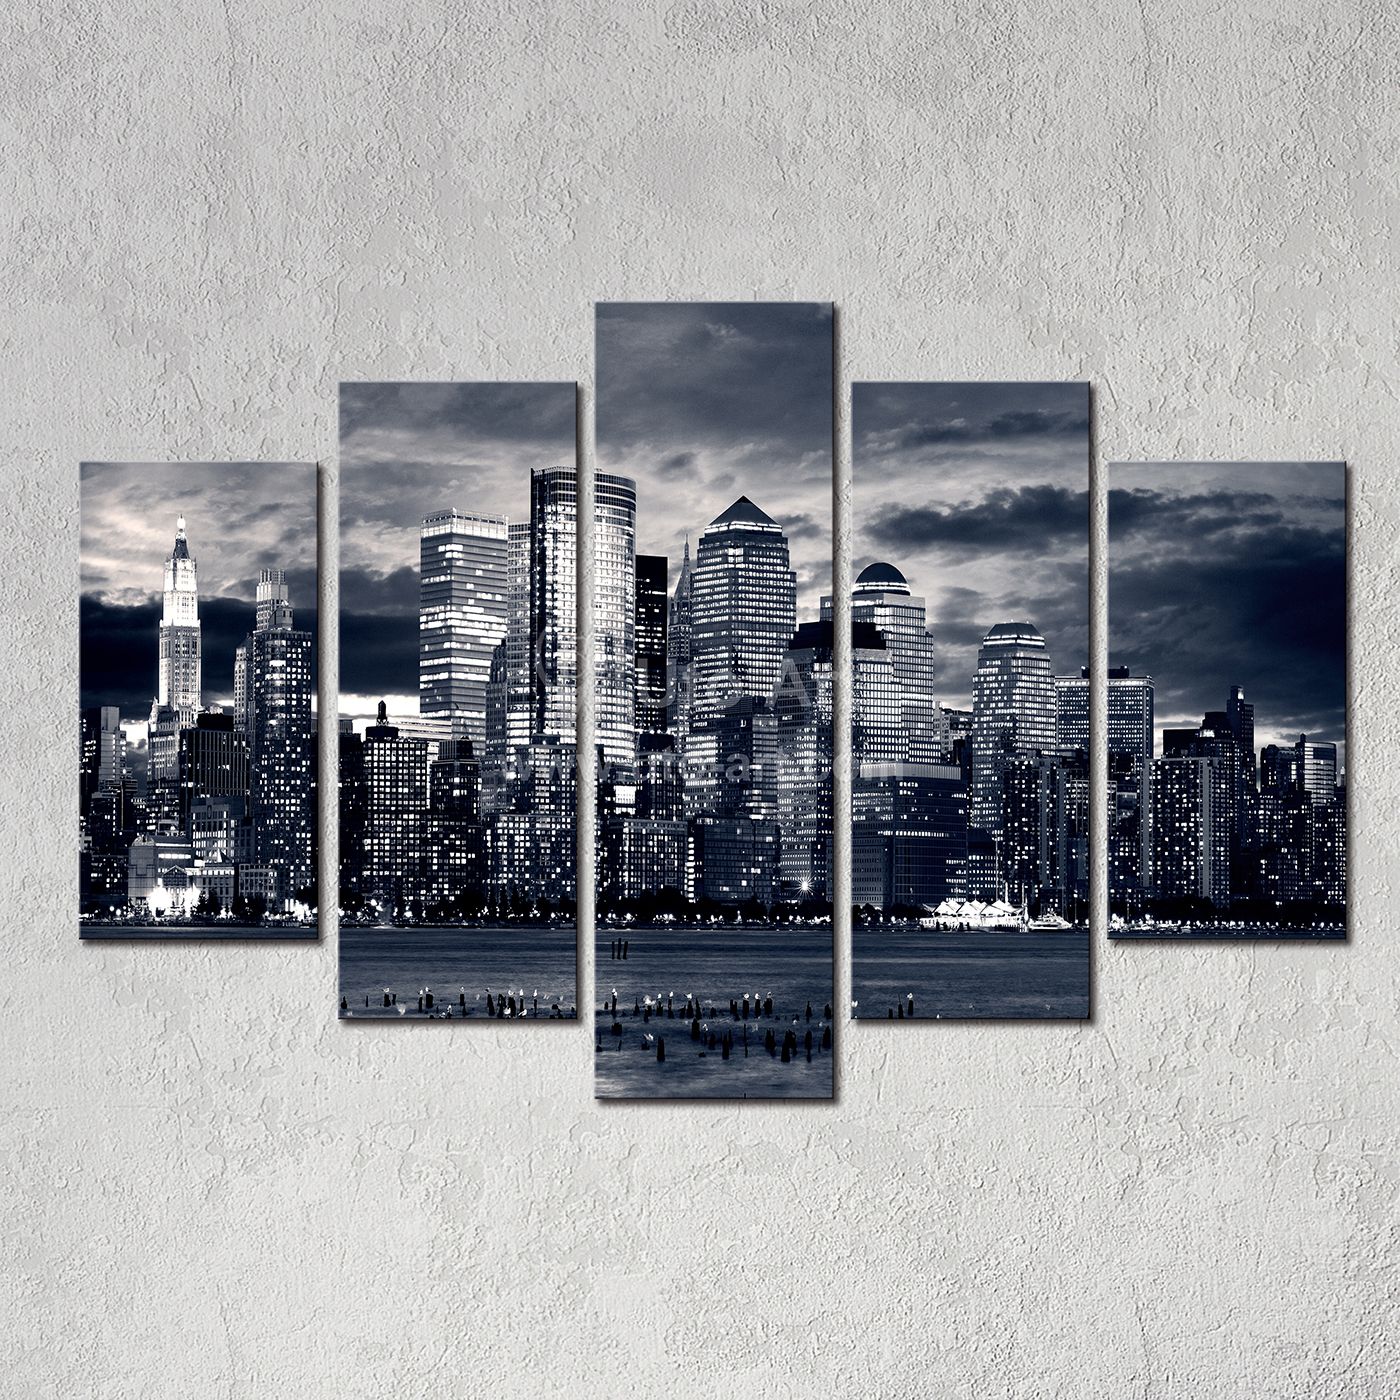 2019 Modern Home Decor New York City Painting Black White Digital Picture Print On Canvas Art Panel For Wall Decoration From Utoart 1456